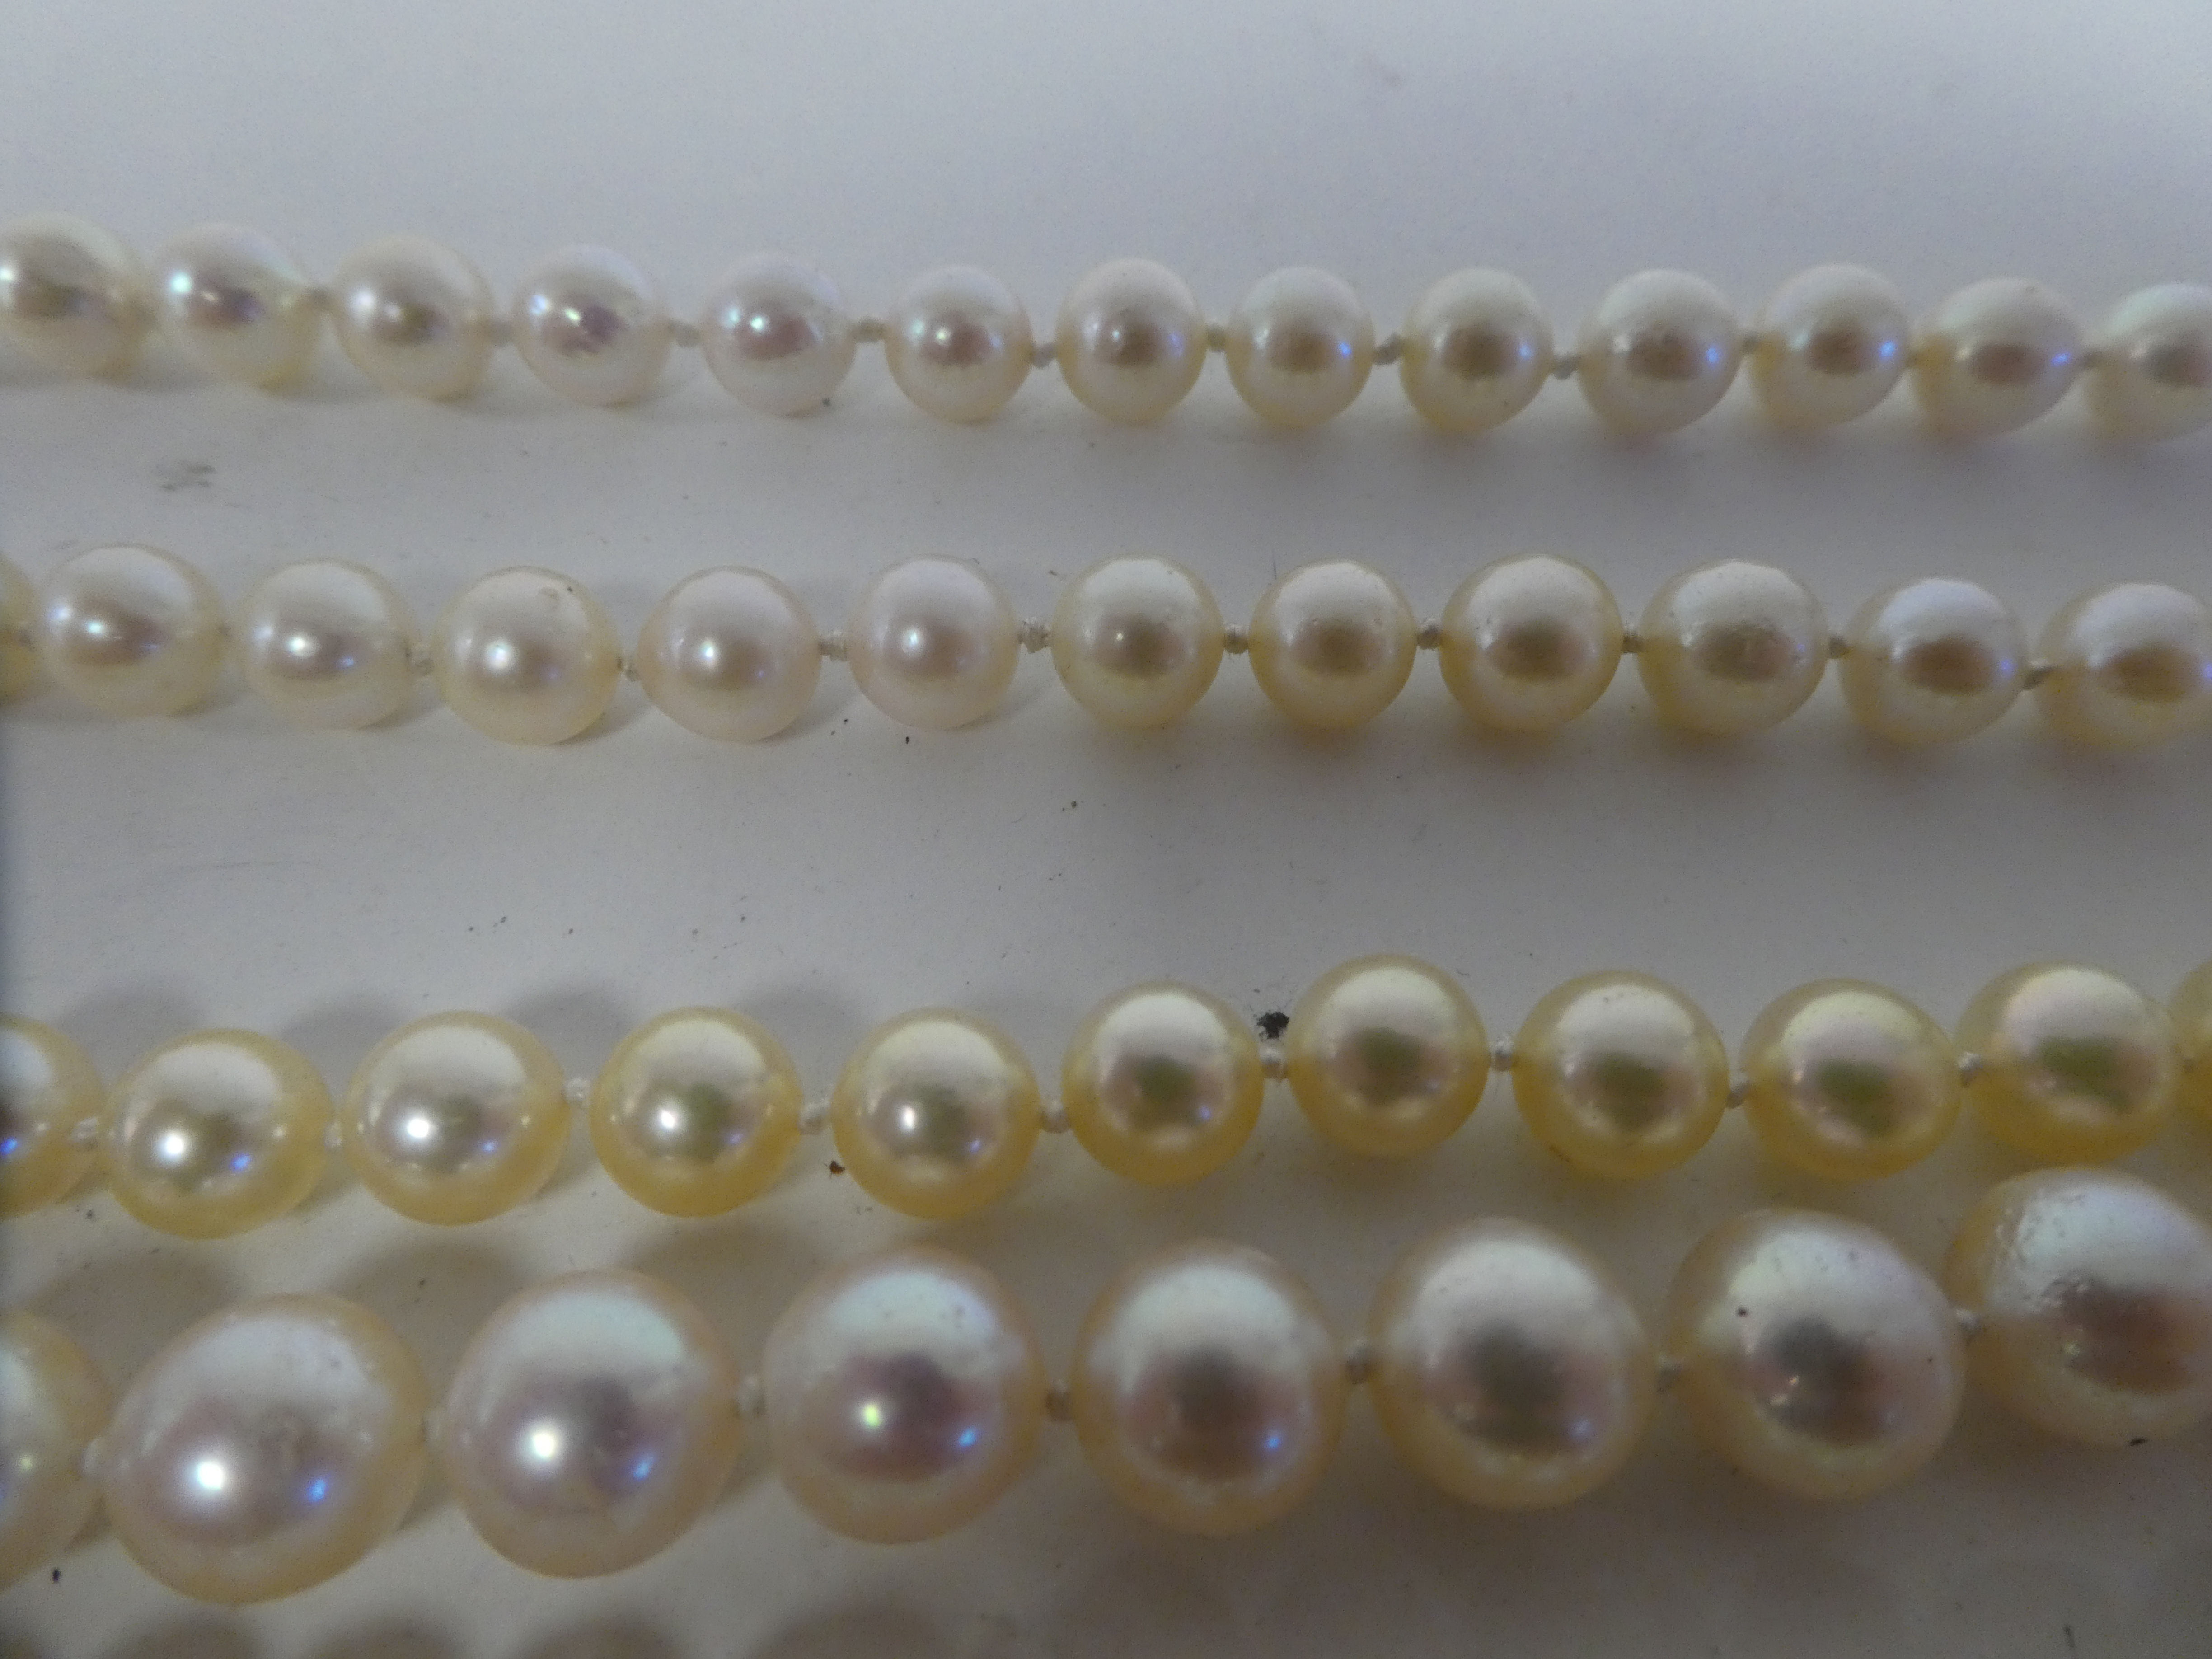 Single strand pearl necklaces - Image 4 of 5